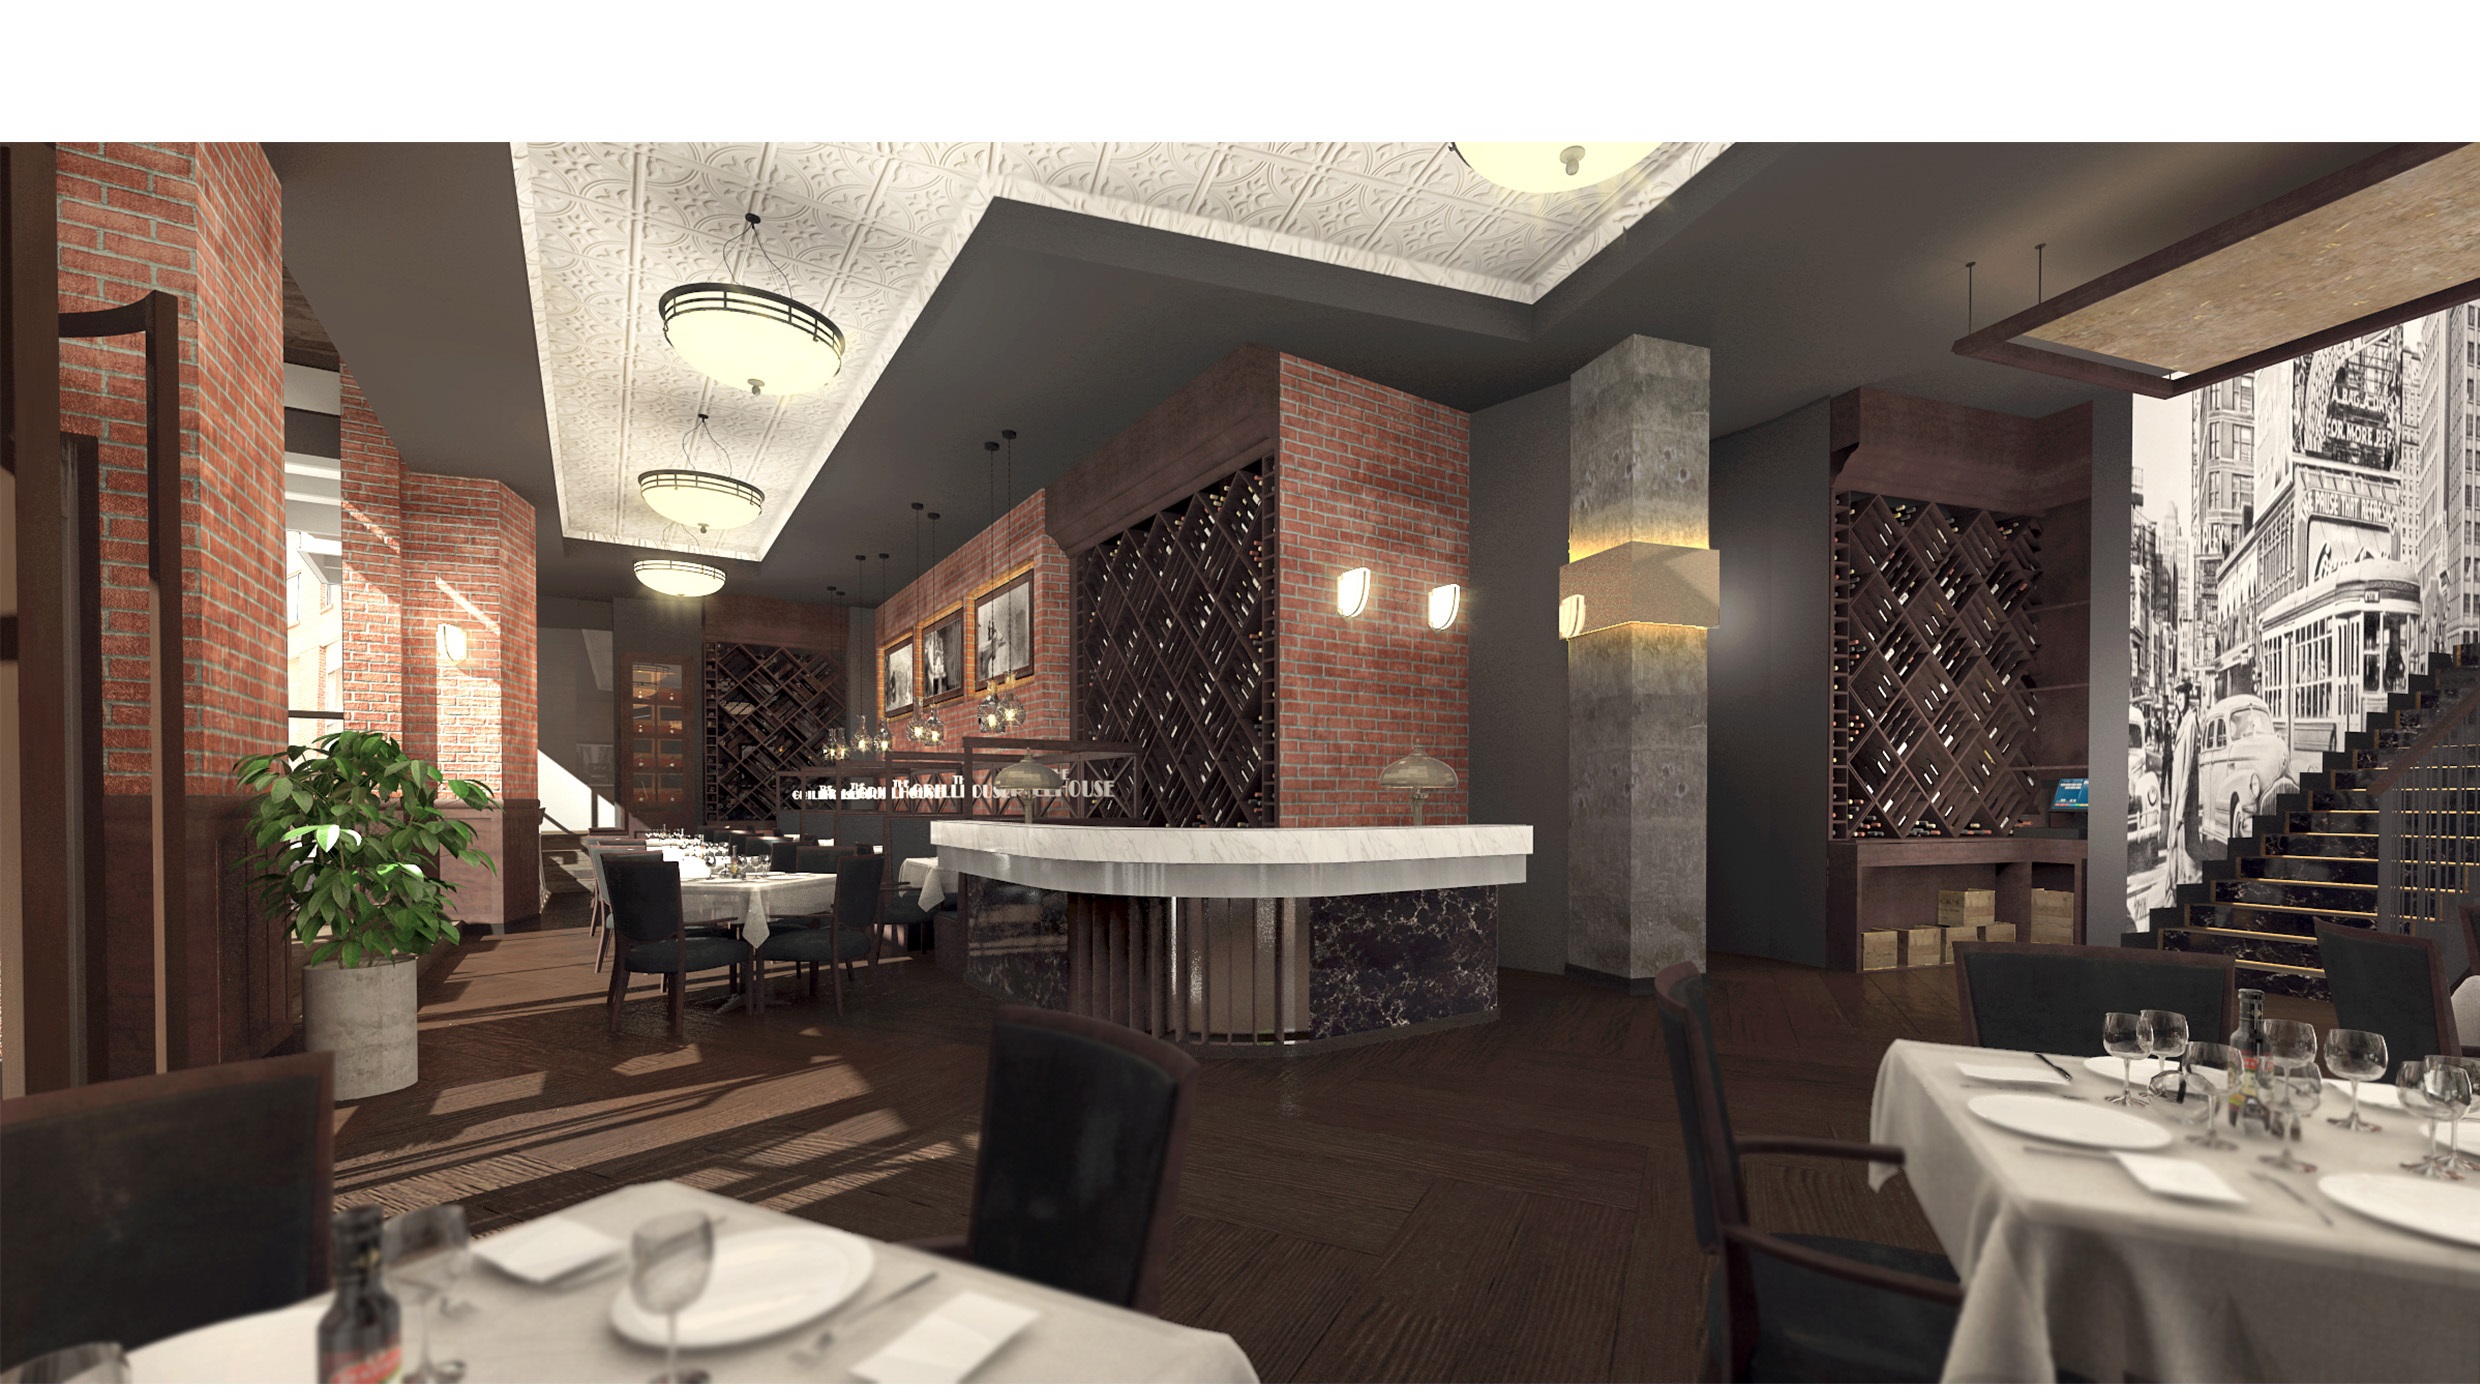 Melrose Arch The Grillhouse artist's impression2